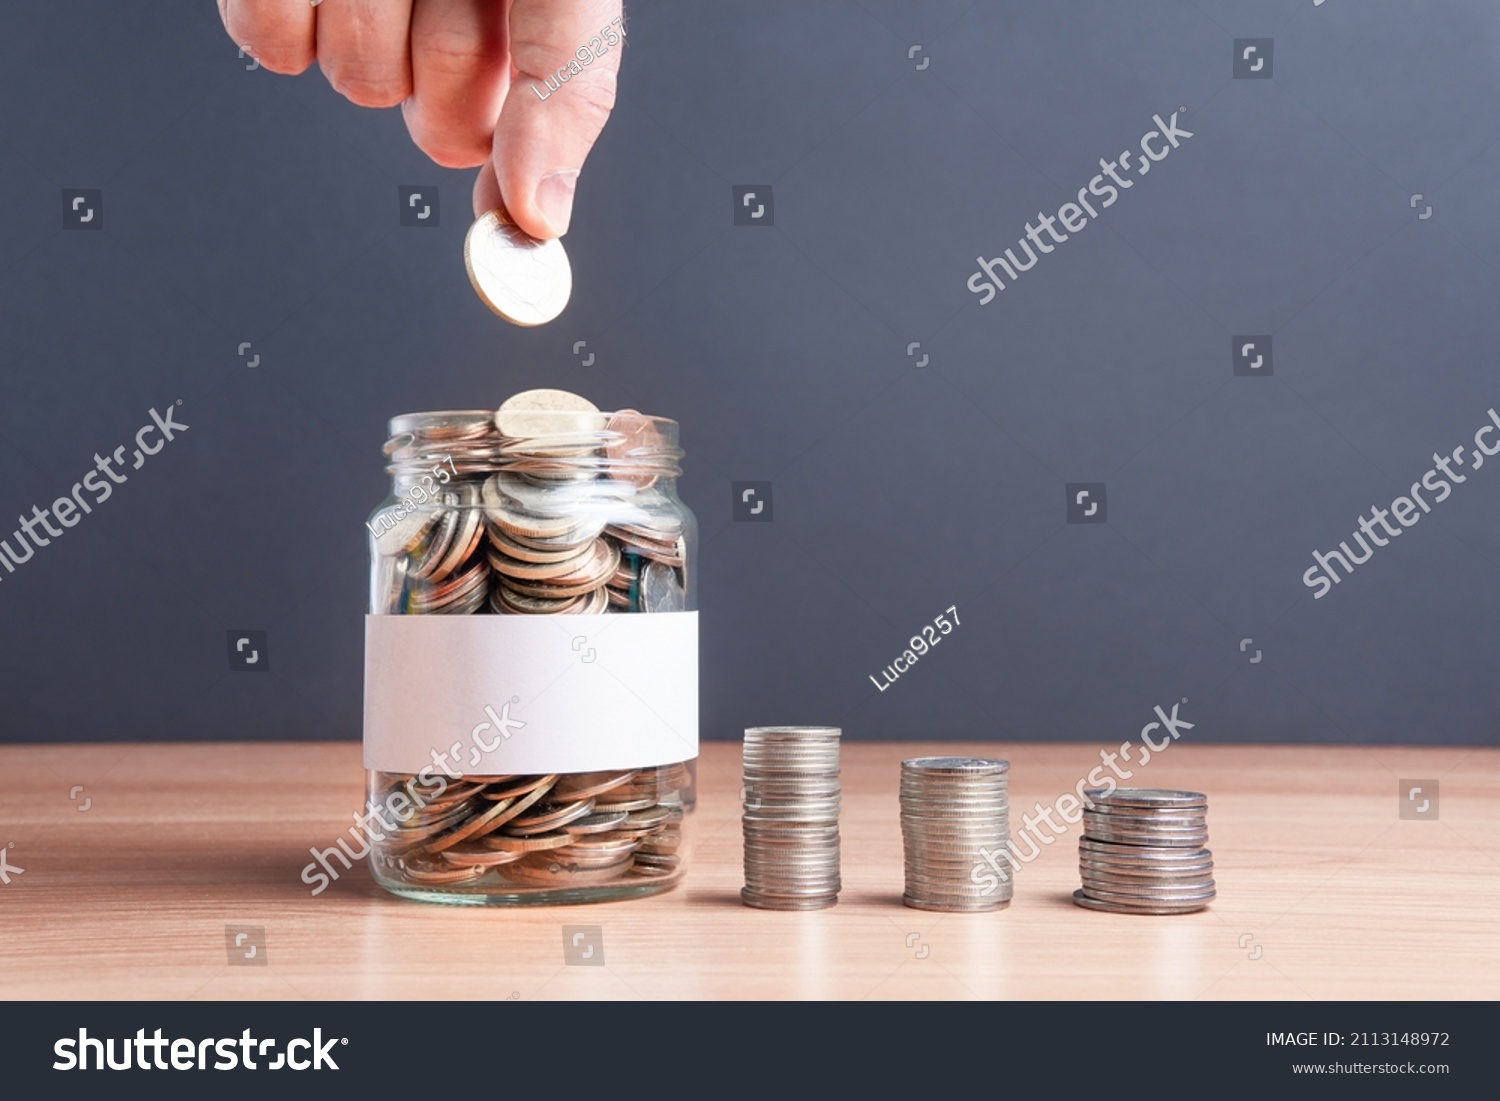 The coins are in a glass jar . Investment concept. Economic growth. Business management. Capital accumulation. Financial literacy. #2113148972